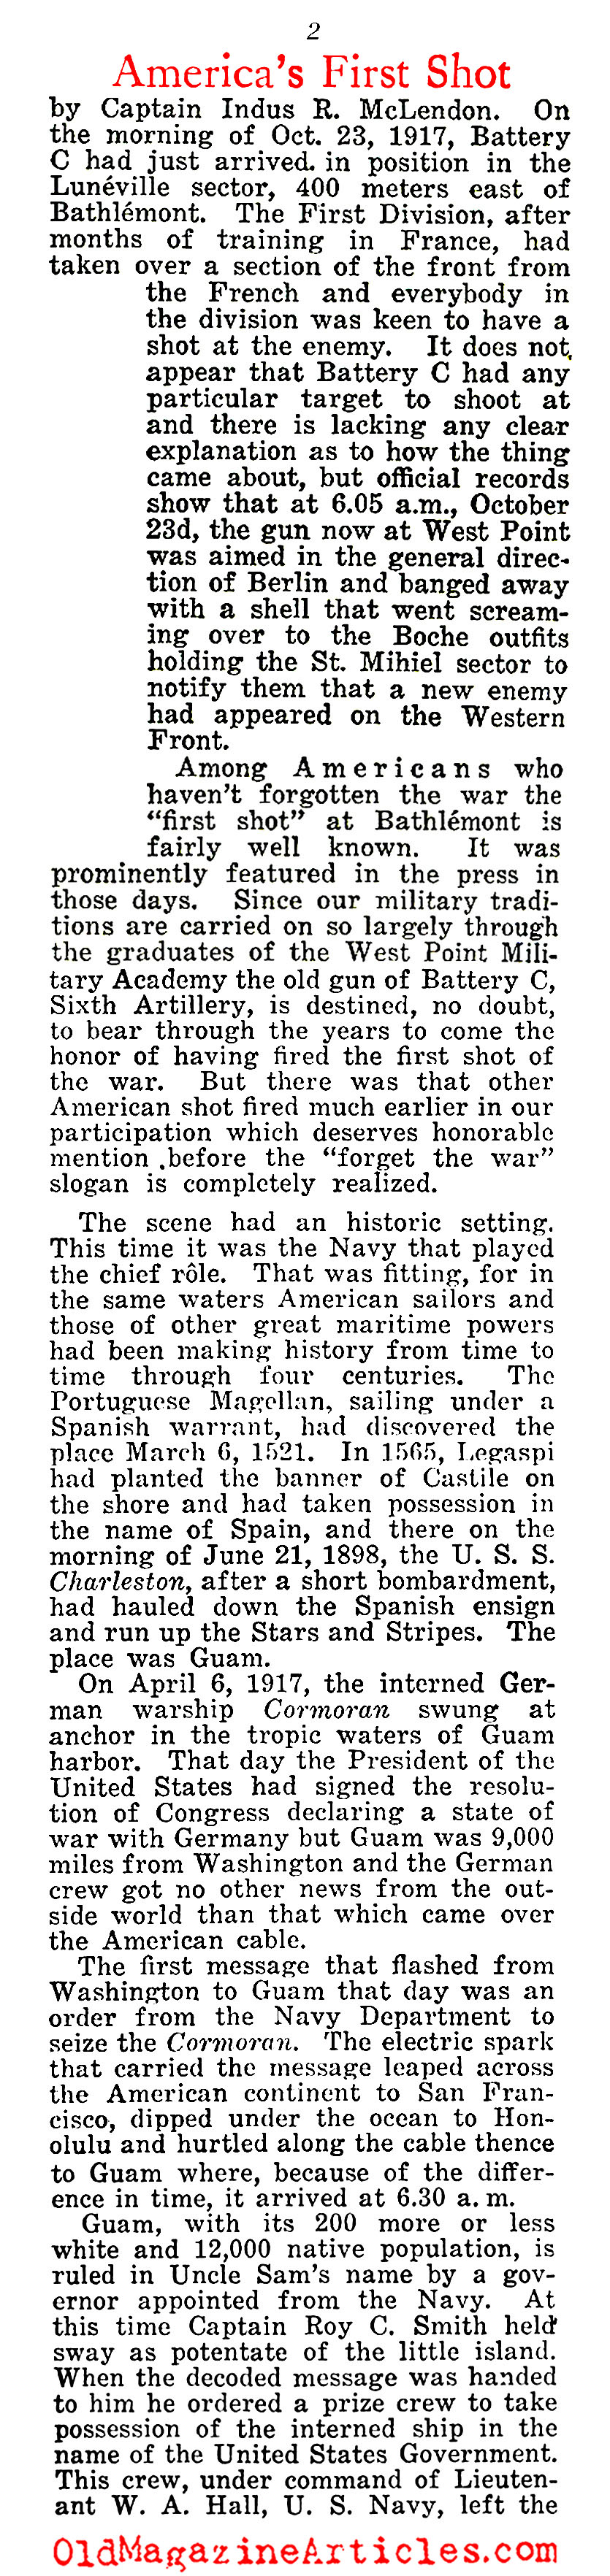 America's First Shot (Various Sources, 1917 - 1937)